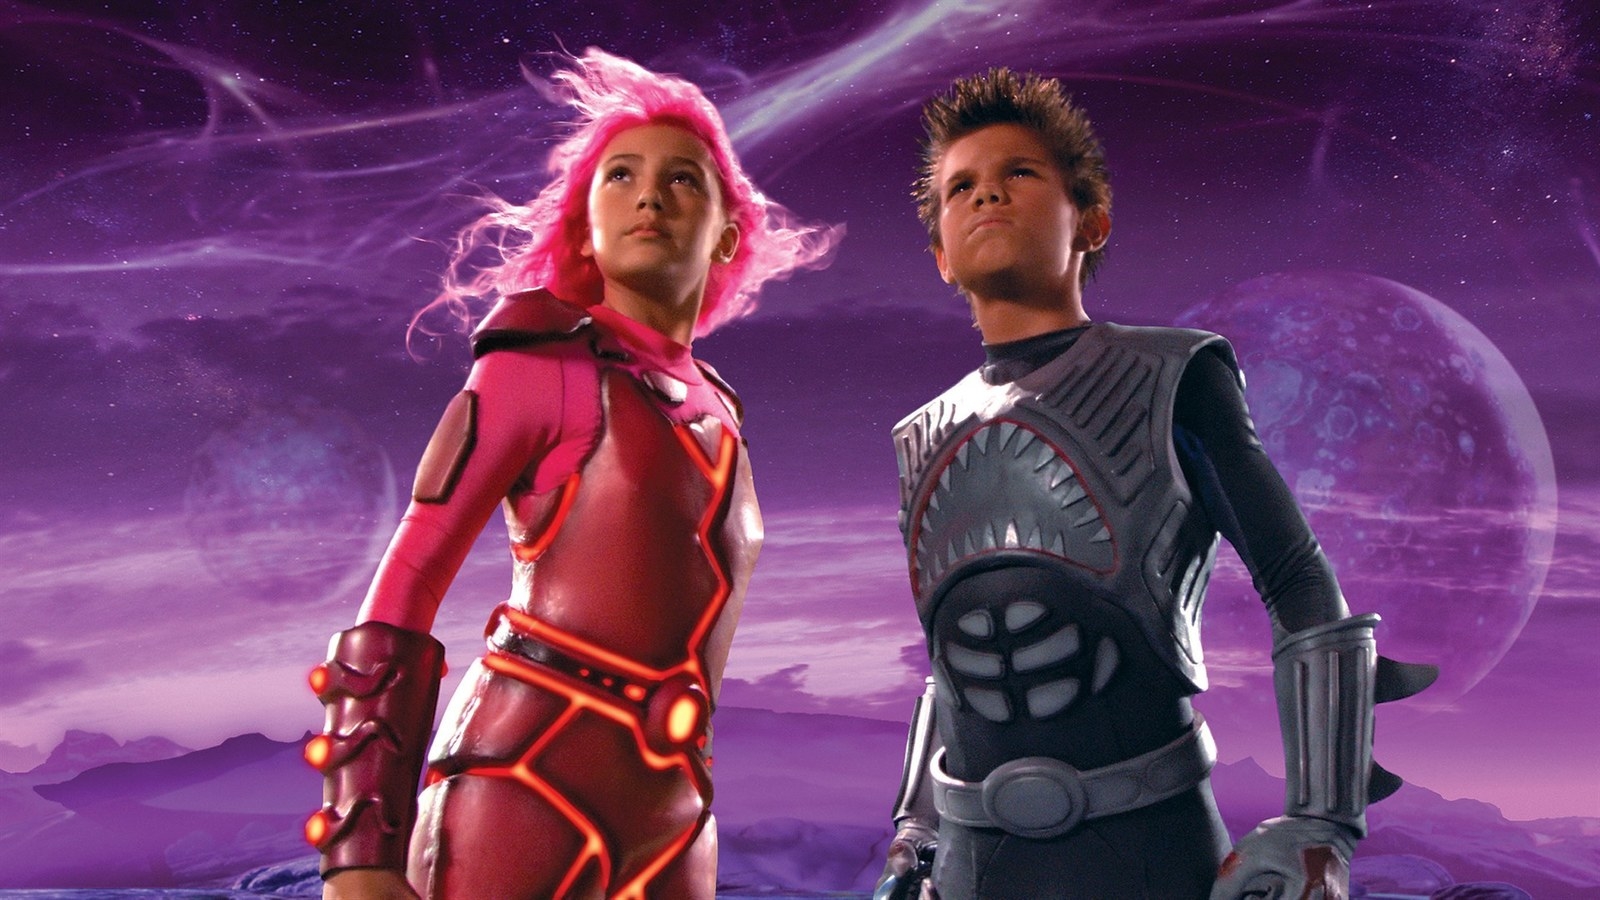 Sharkboy and Lavagirl standing side by side